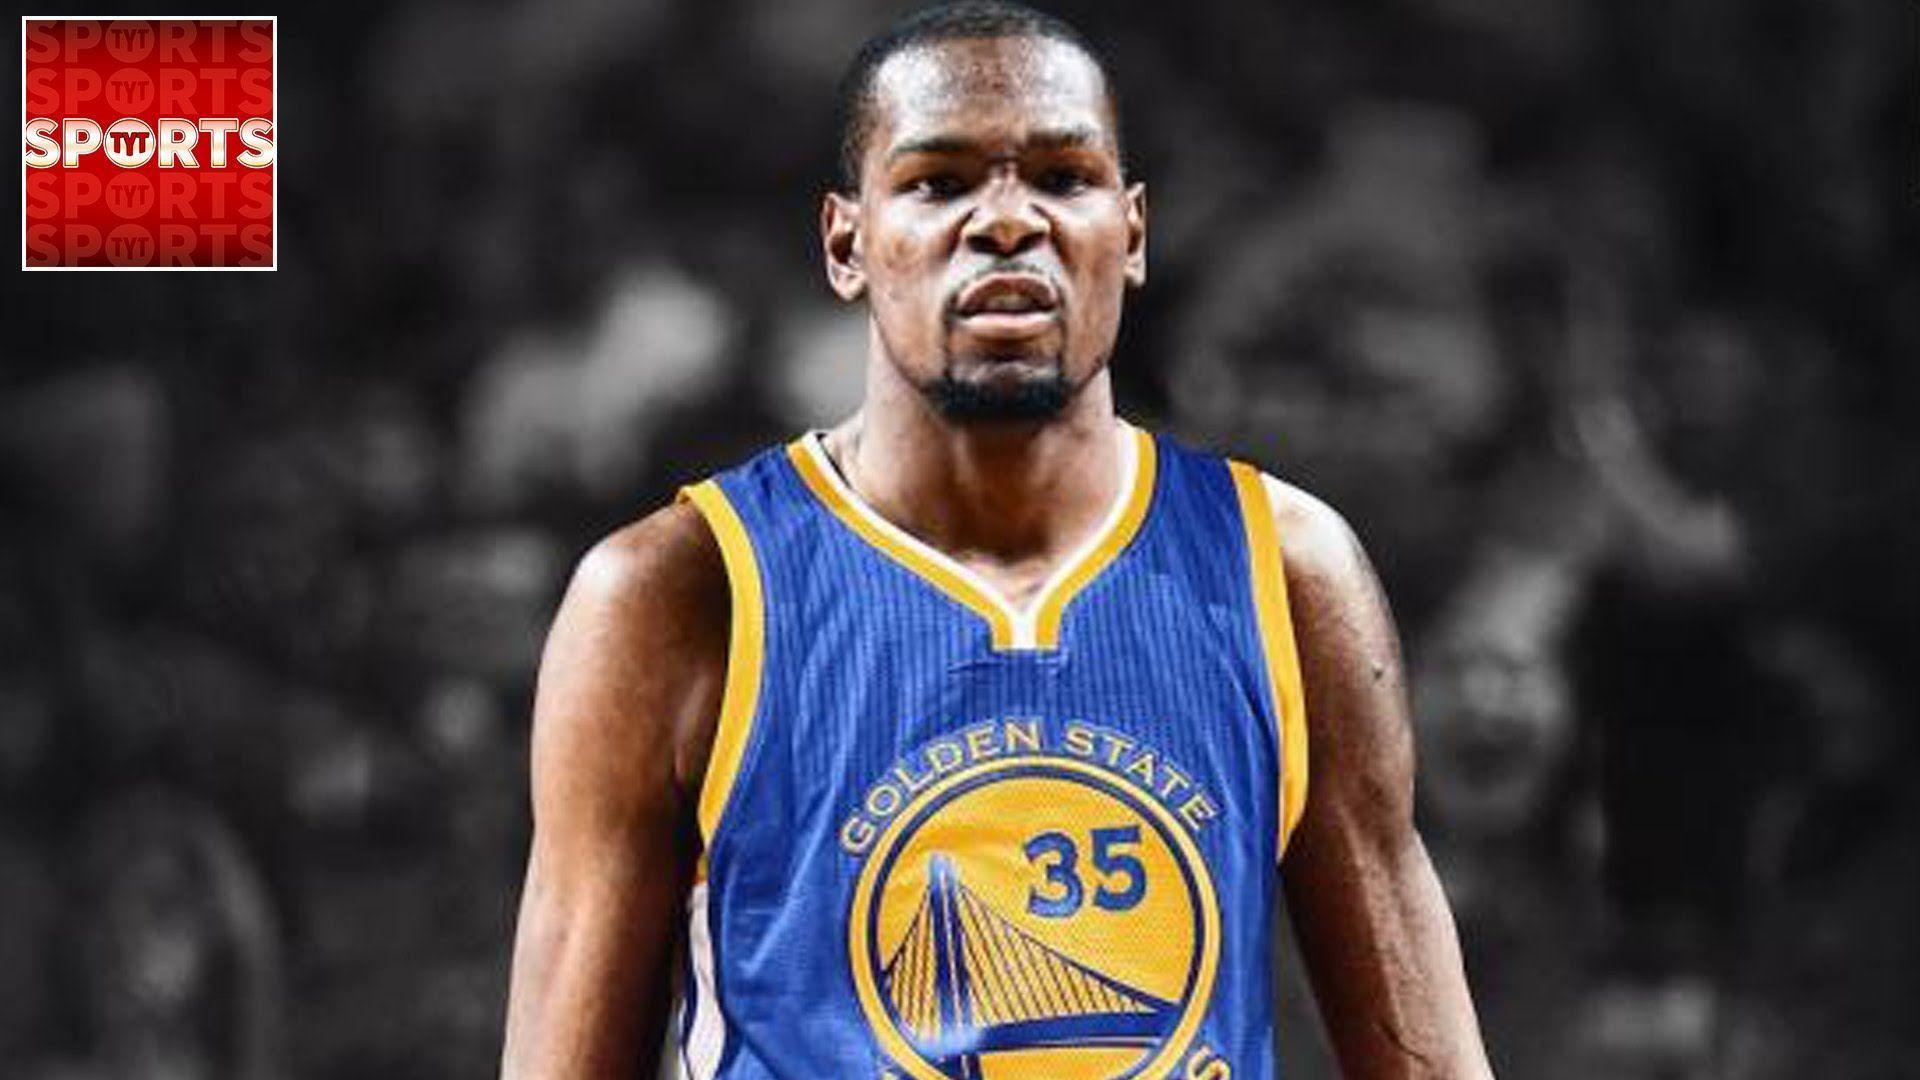 30+ Kevin Durant HD Wallpapers and Backgrounds